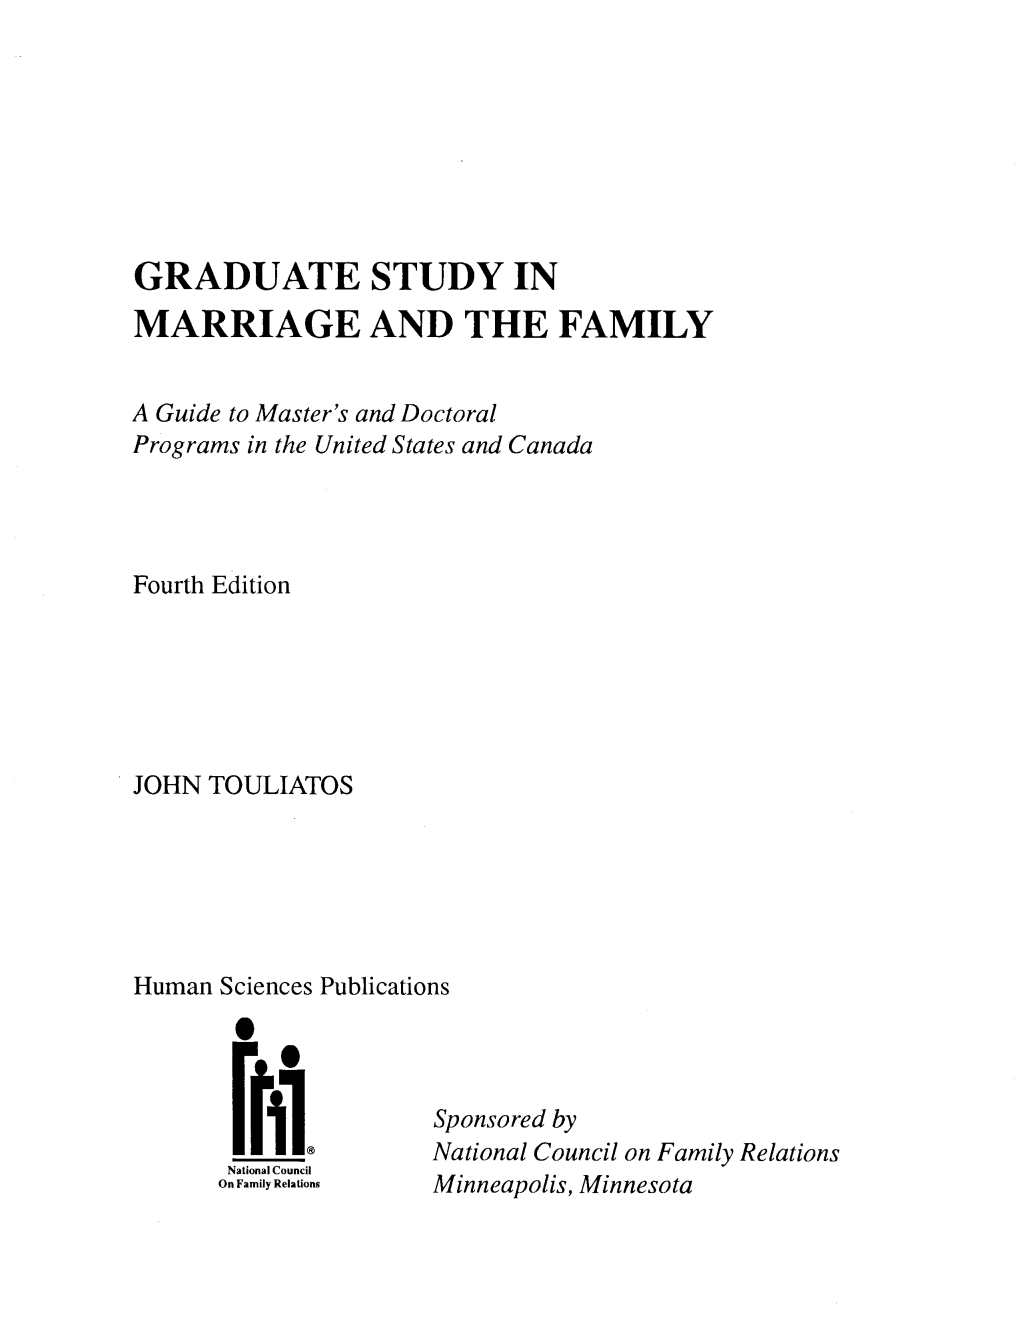 Graduate Study in Marriage and the Family